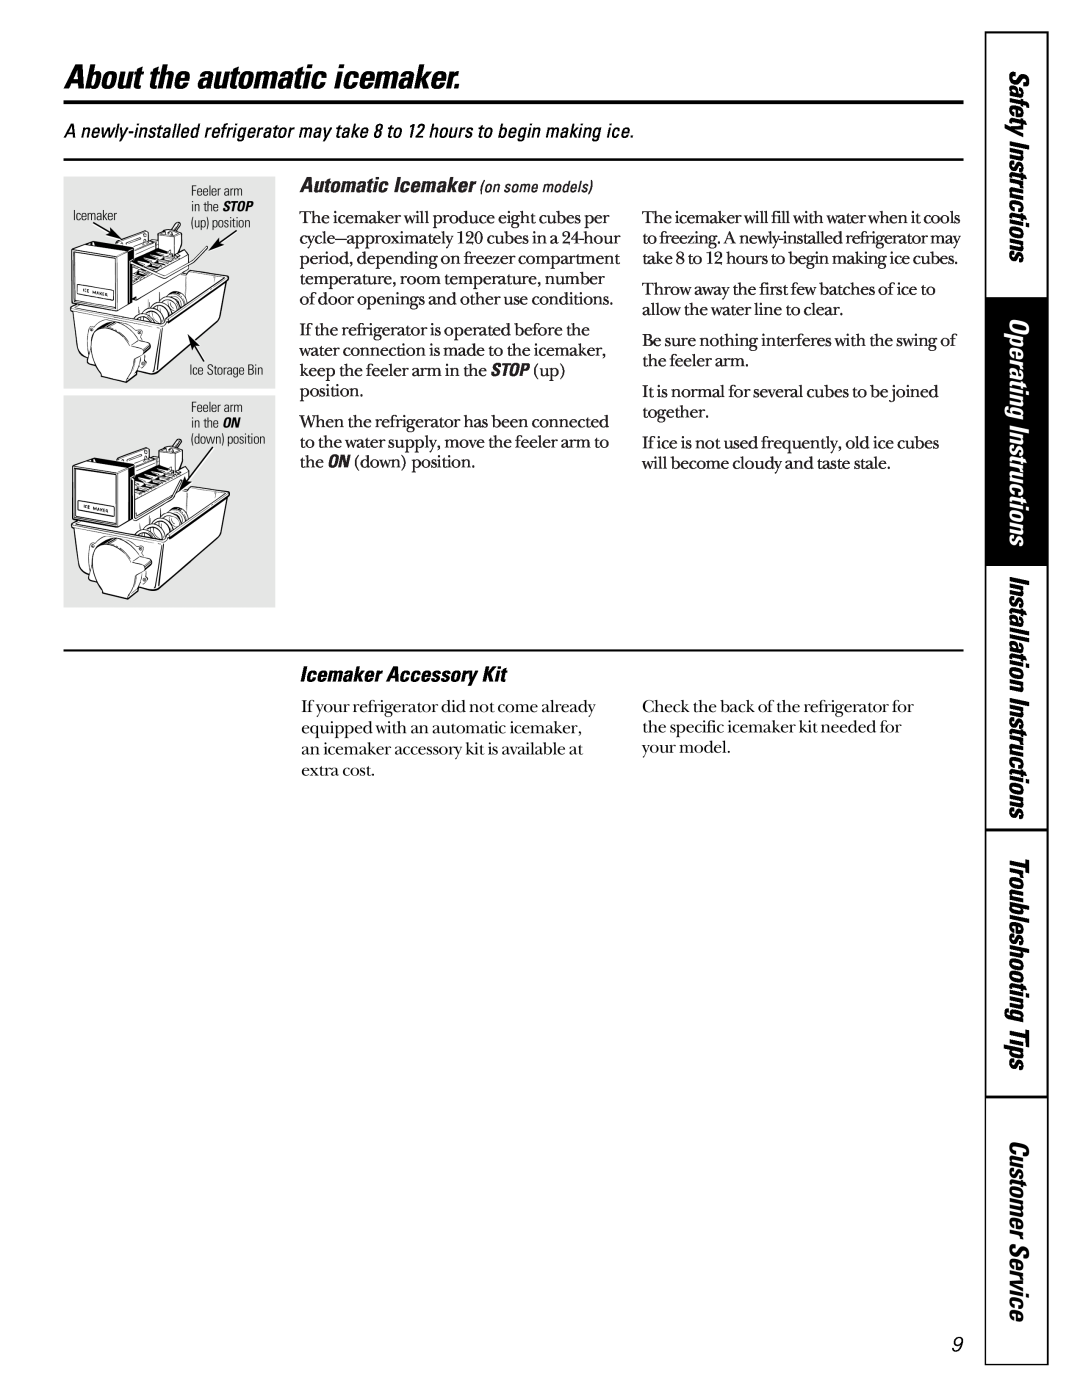 GE 162D6733P007 owner manual About the automatic icemaker, Safety, Instructions Troubleshooting Tips Customer Service 